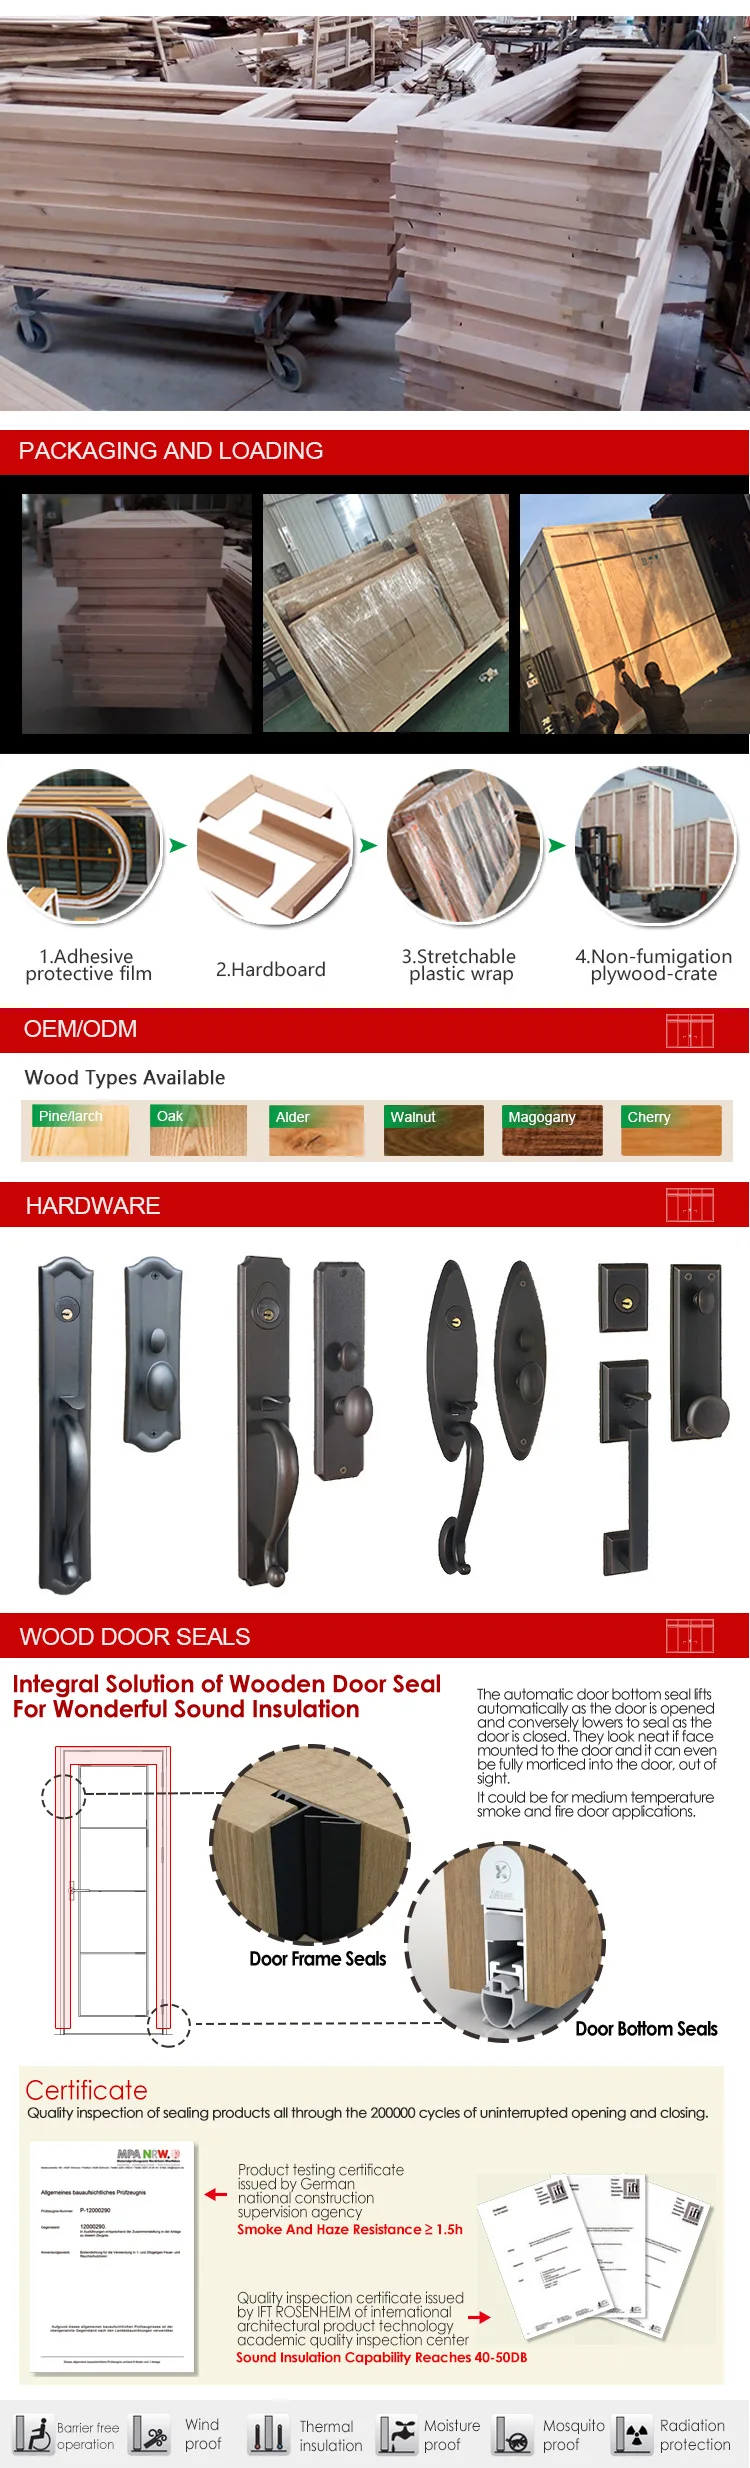 Packaging and hardware